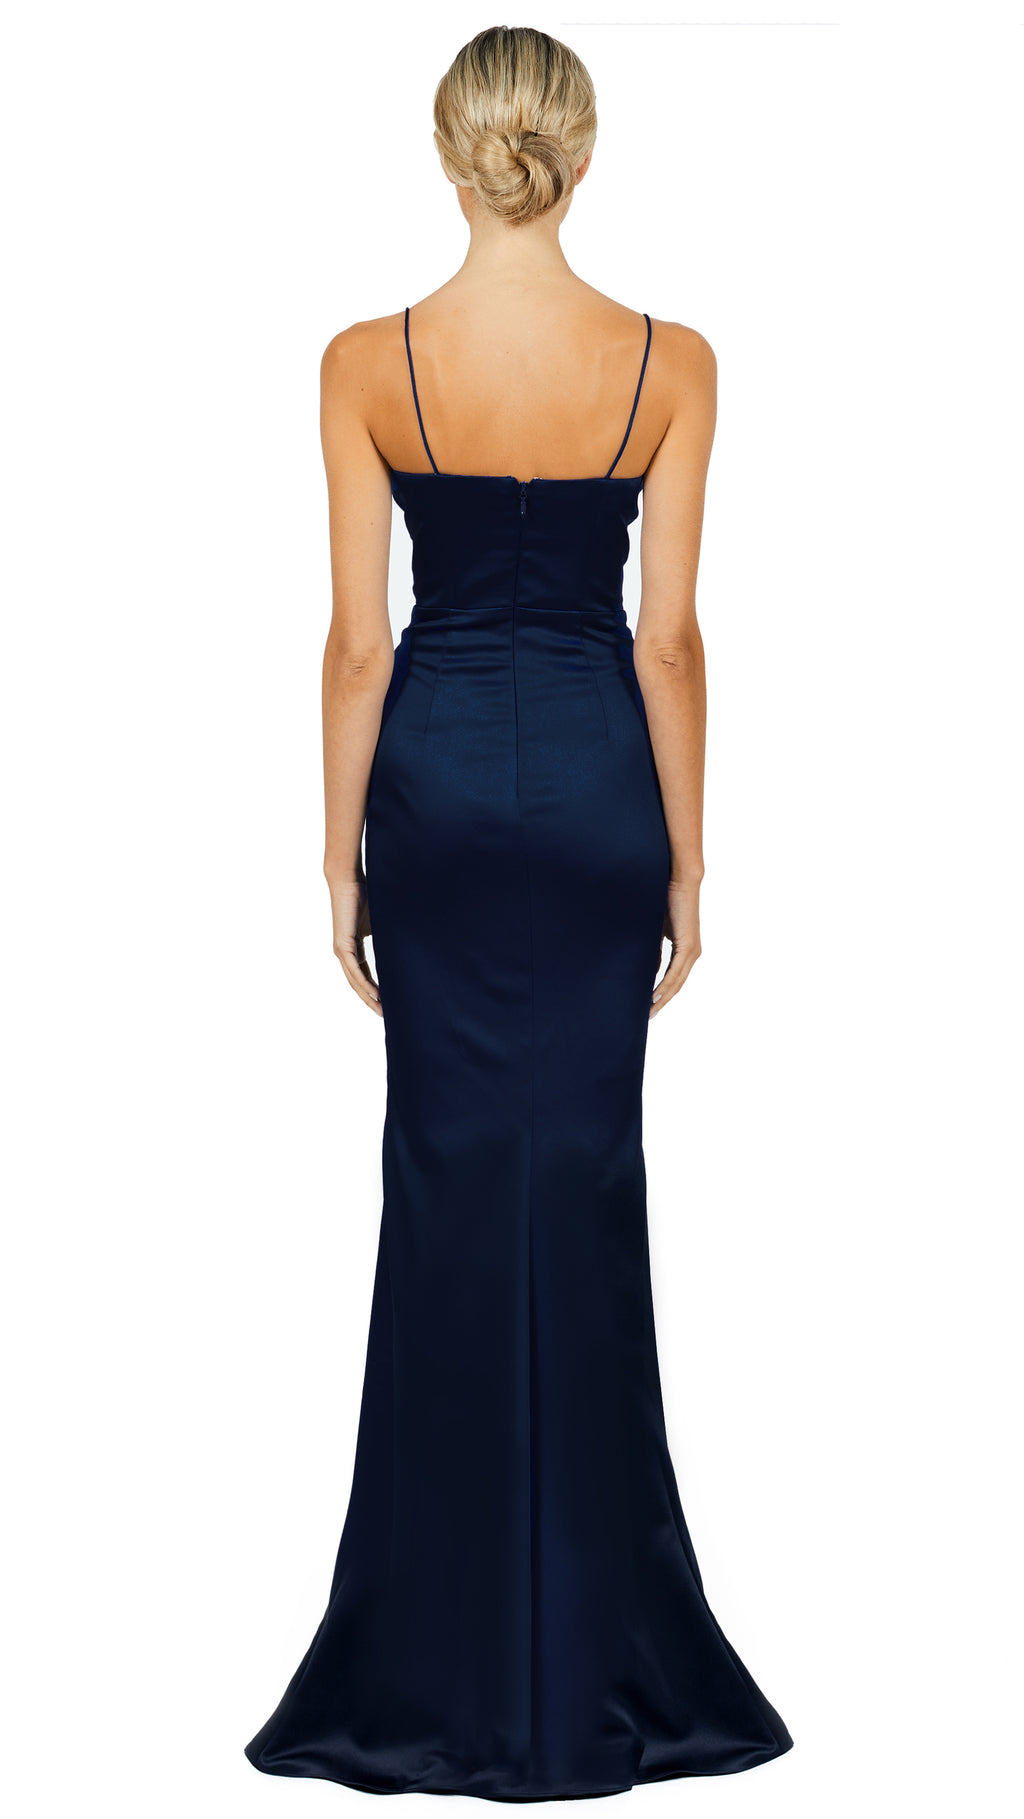 Cassy Fitted Corset Gown in Navy BACK